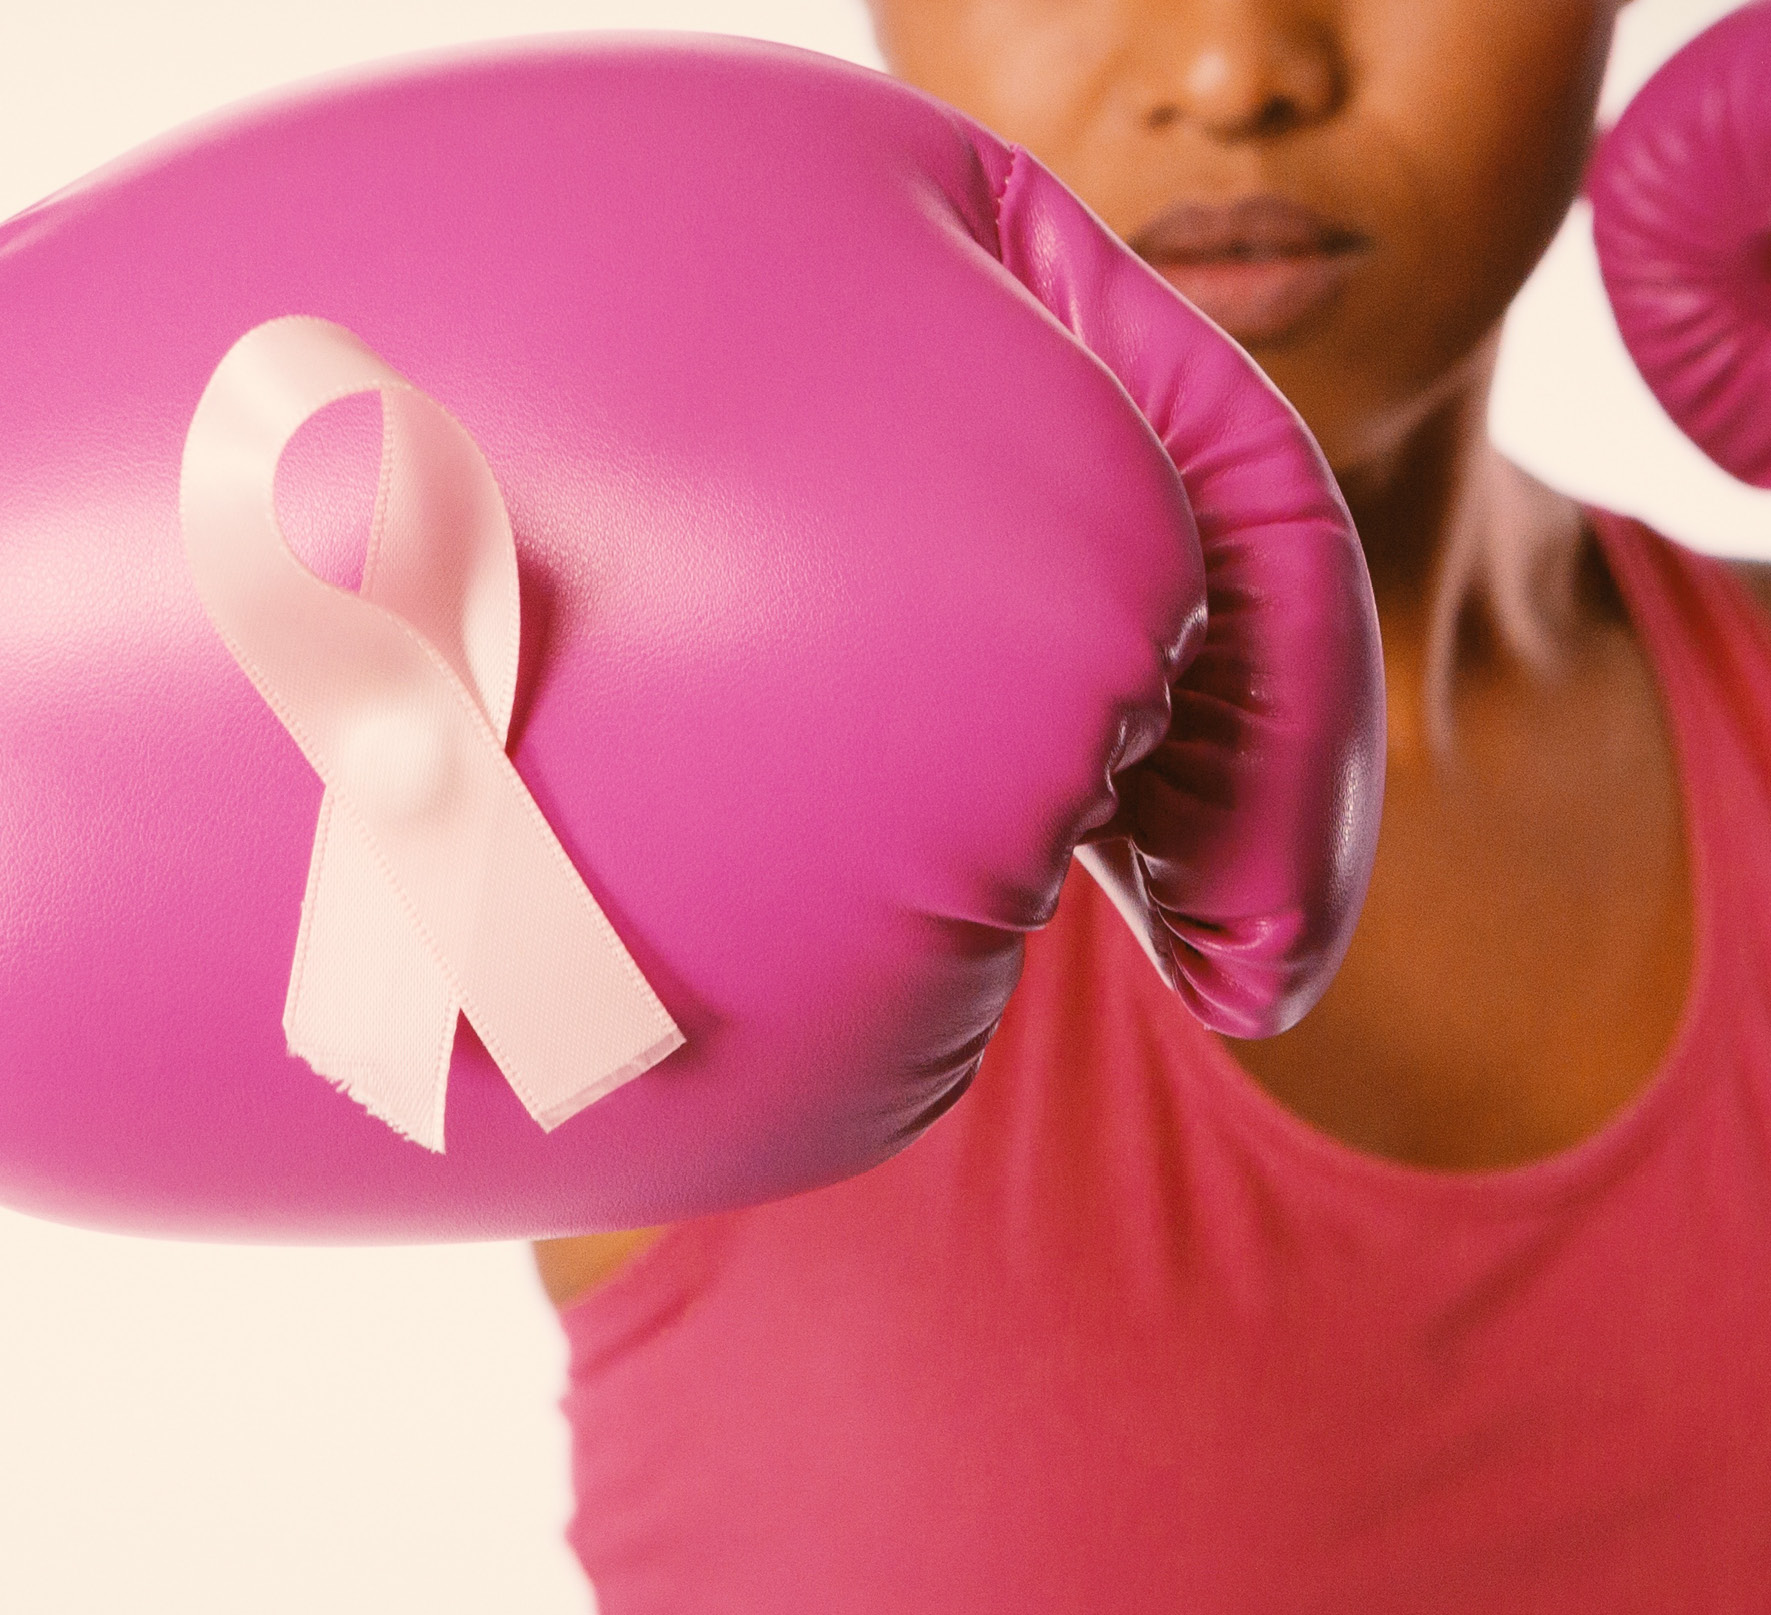 Breast Cancer: Warning Signs You Shouldn't Ignore